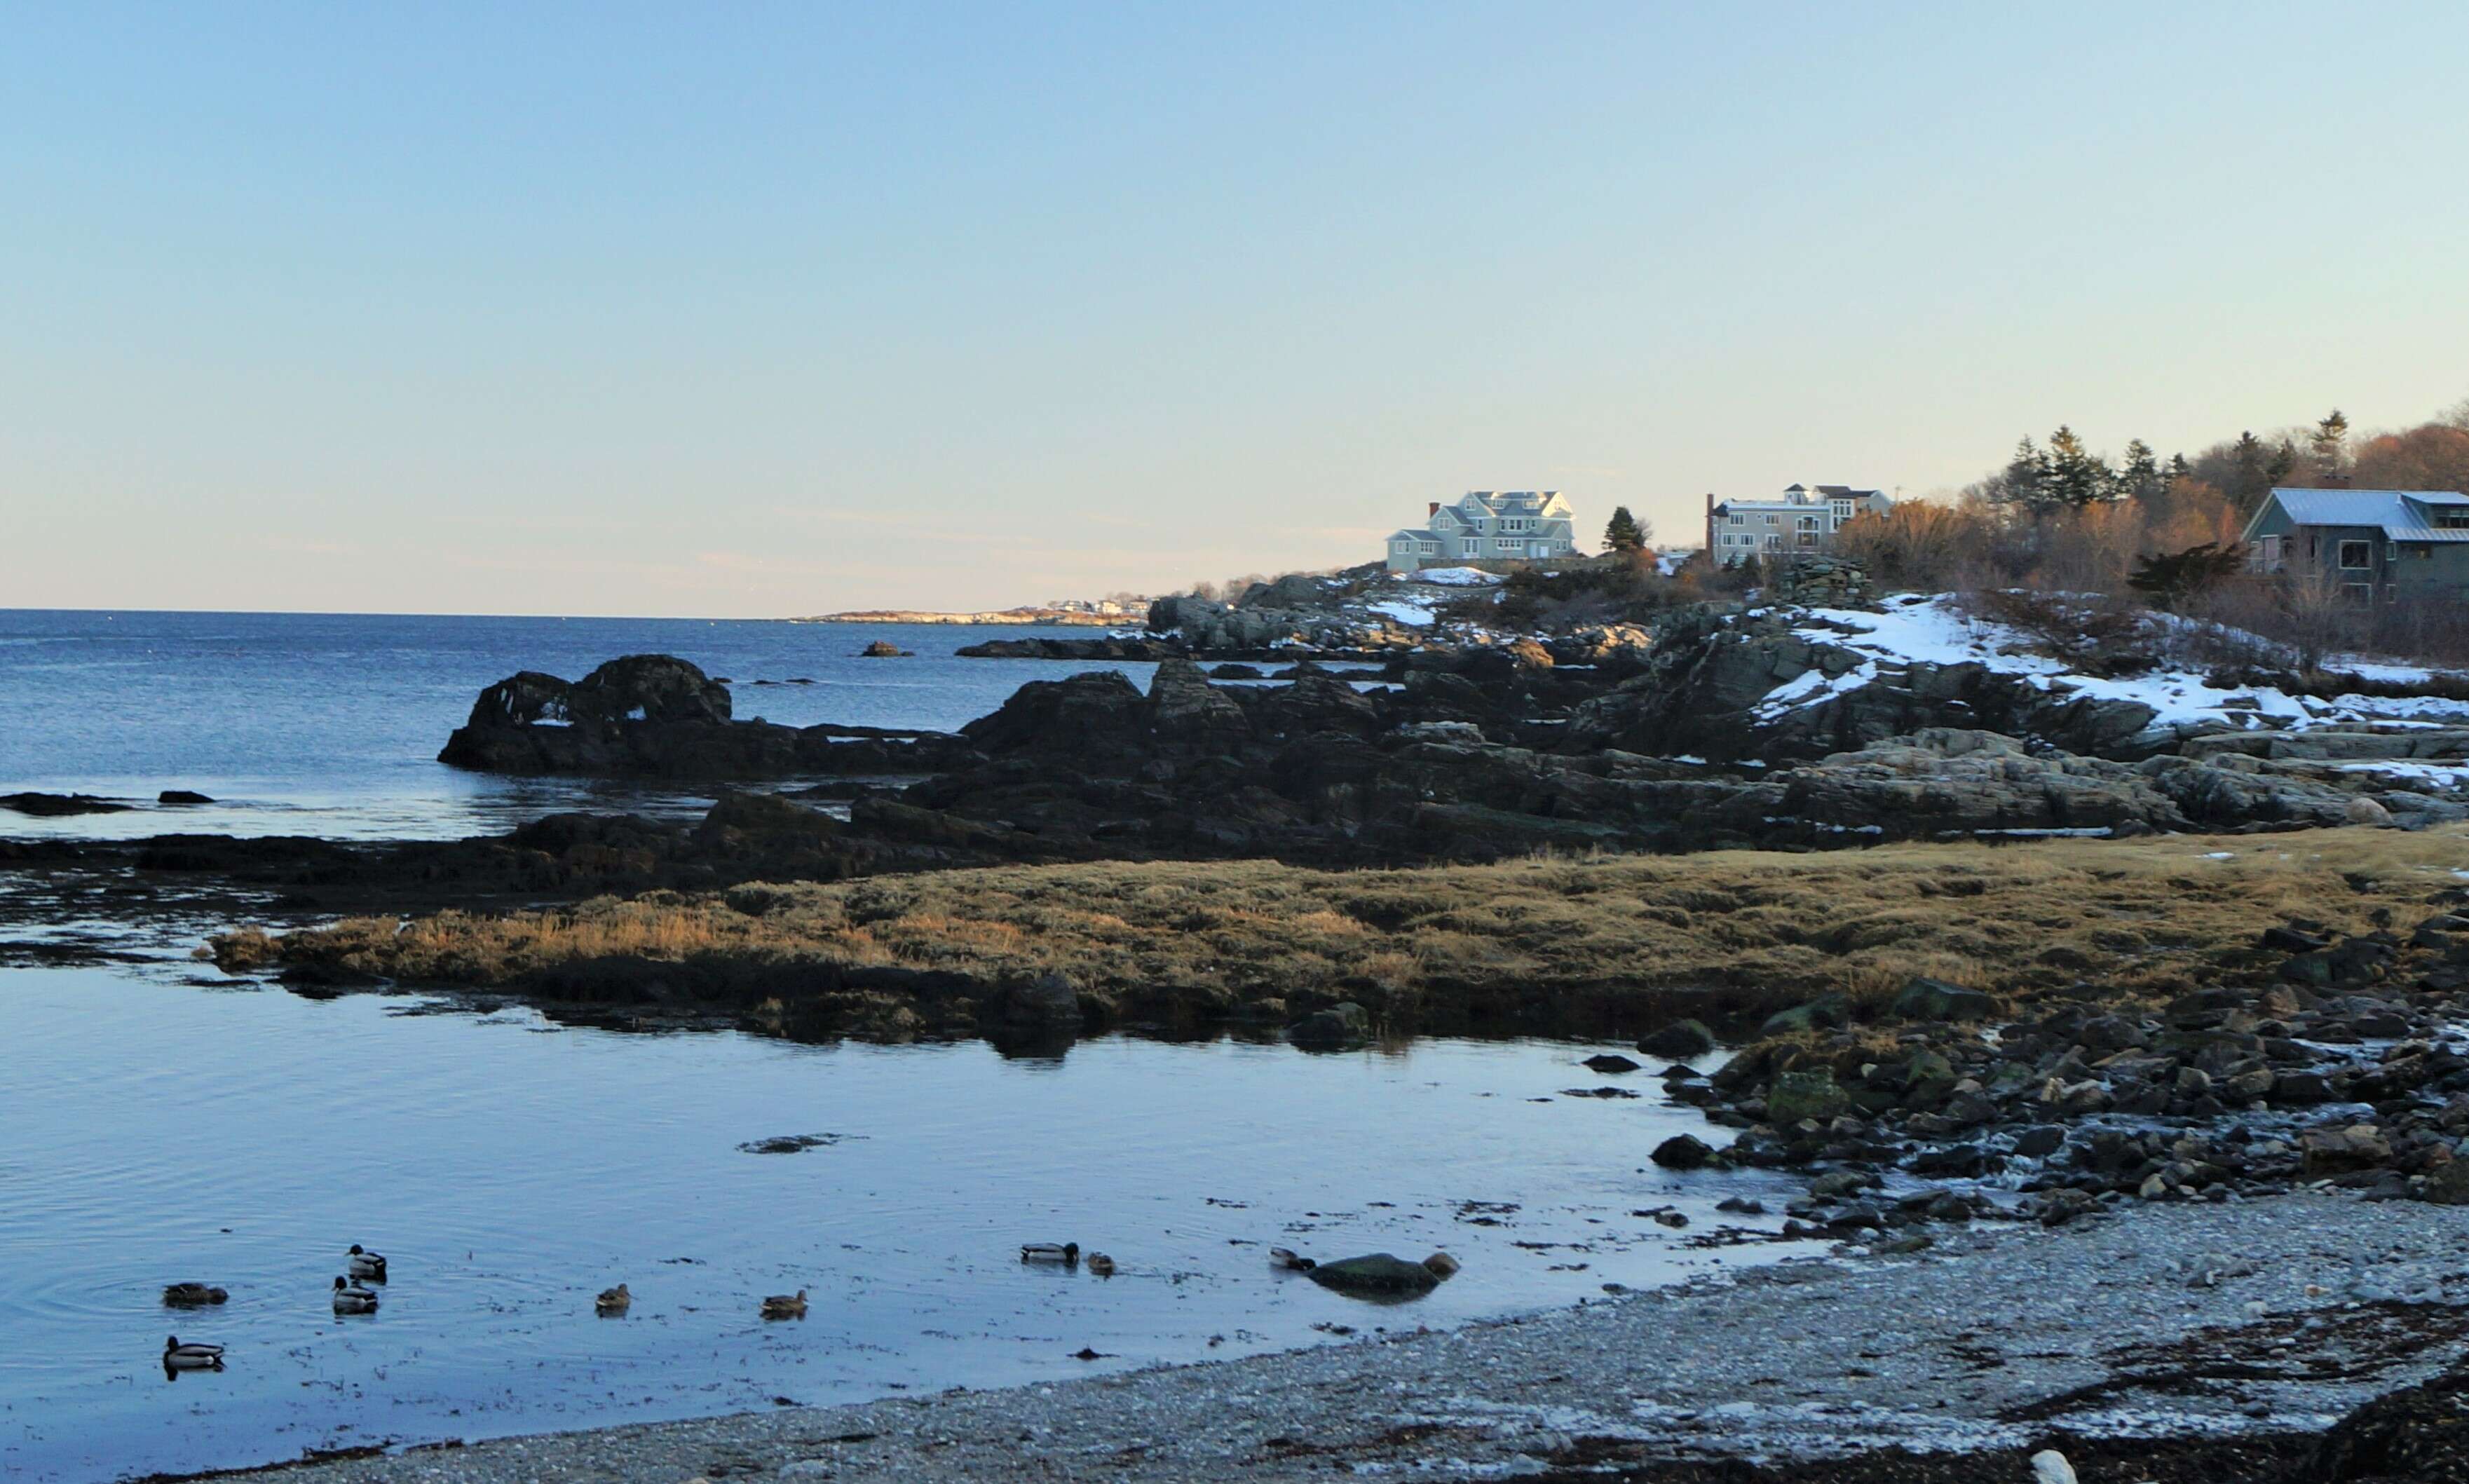 a rocky coast with a couple large expensive looking houses on a promontory in the distance